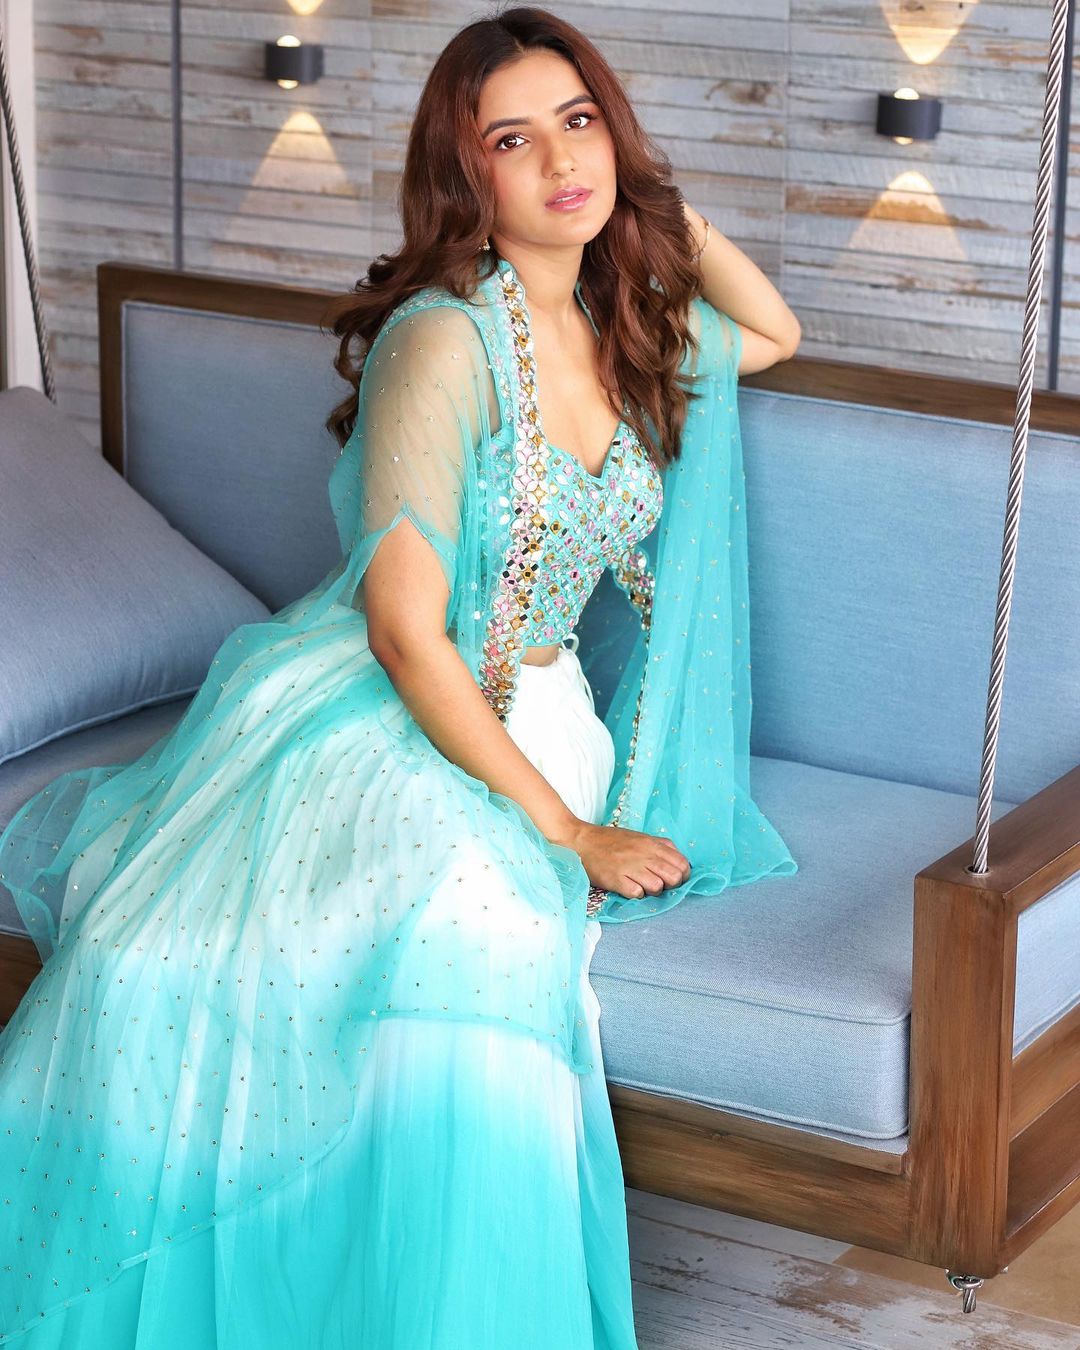 Jasmin Bhasin looks adorable in the blue outfit. 